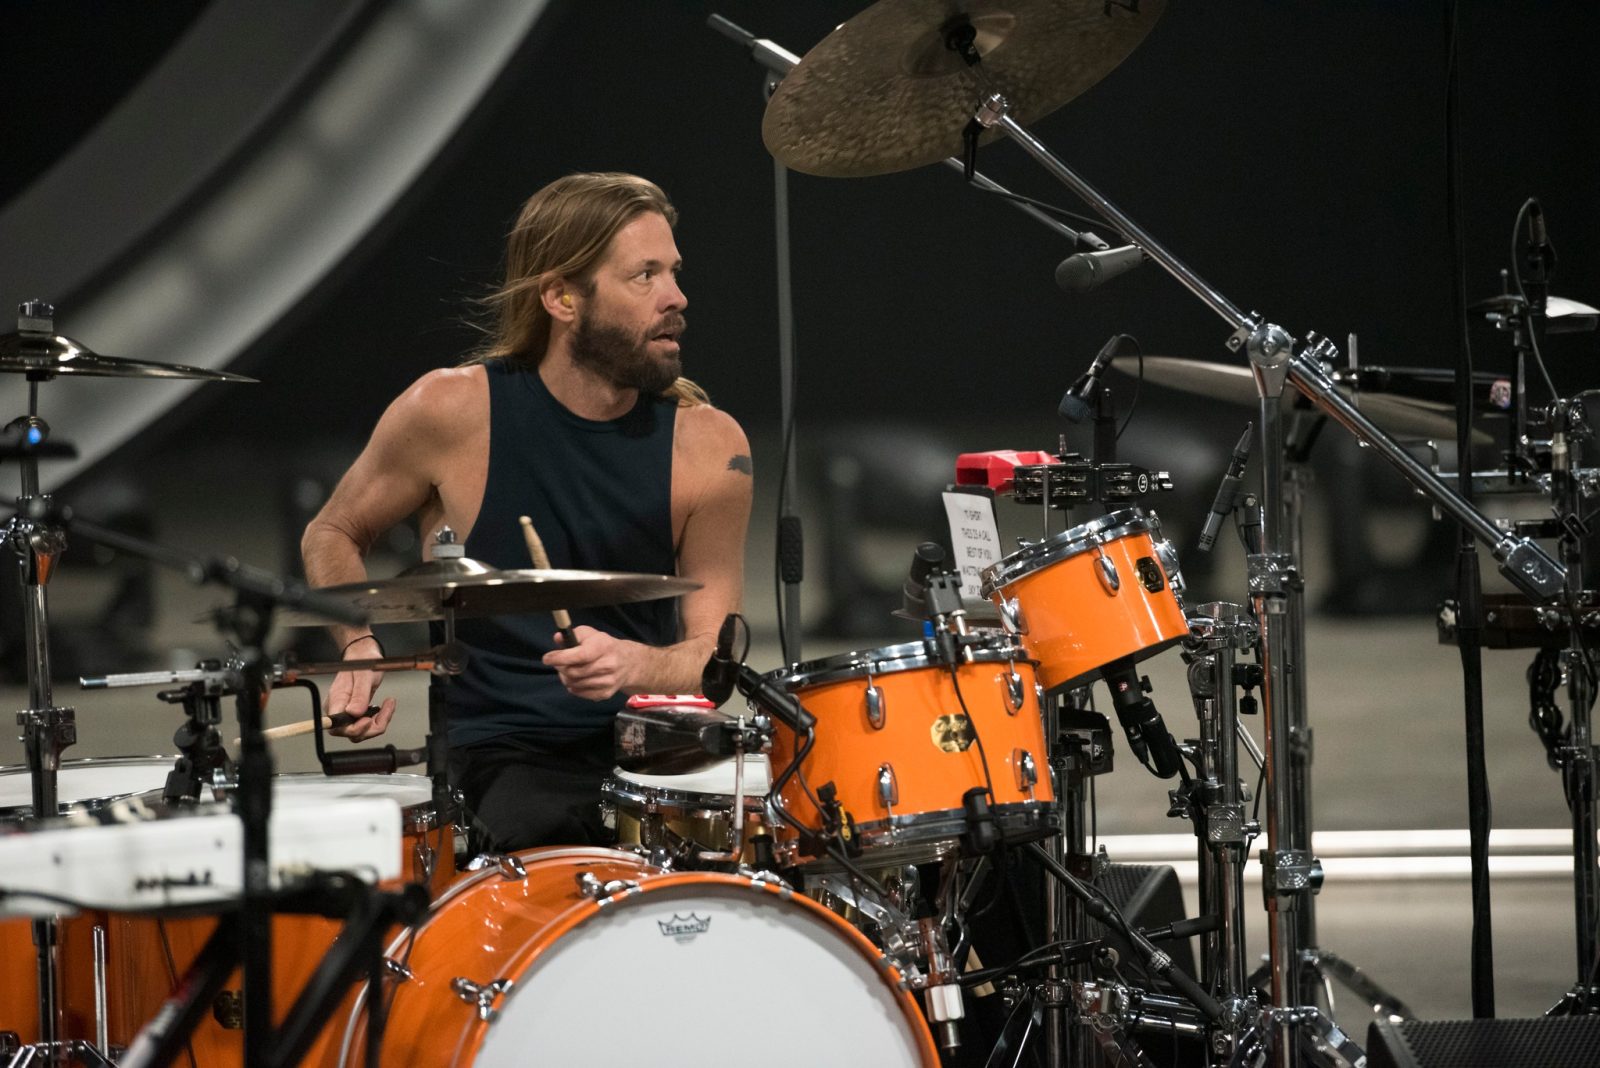 Foo Fighters drummer Taylor Hawkins has died, aged 50, The Manc